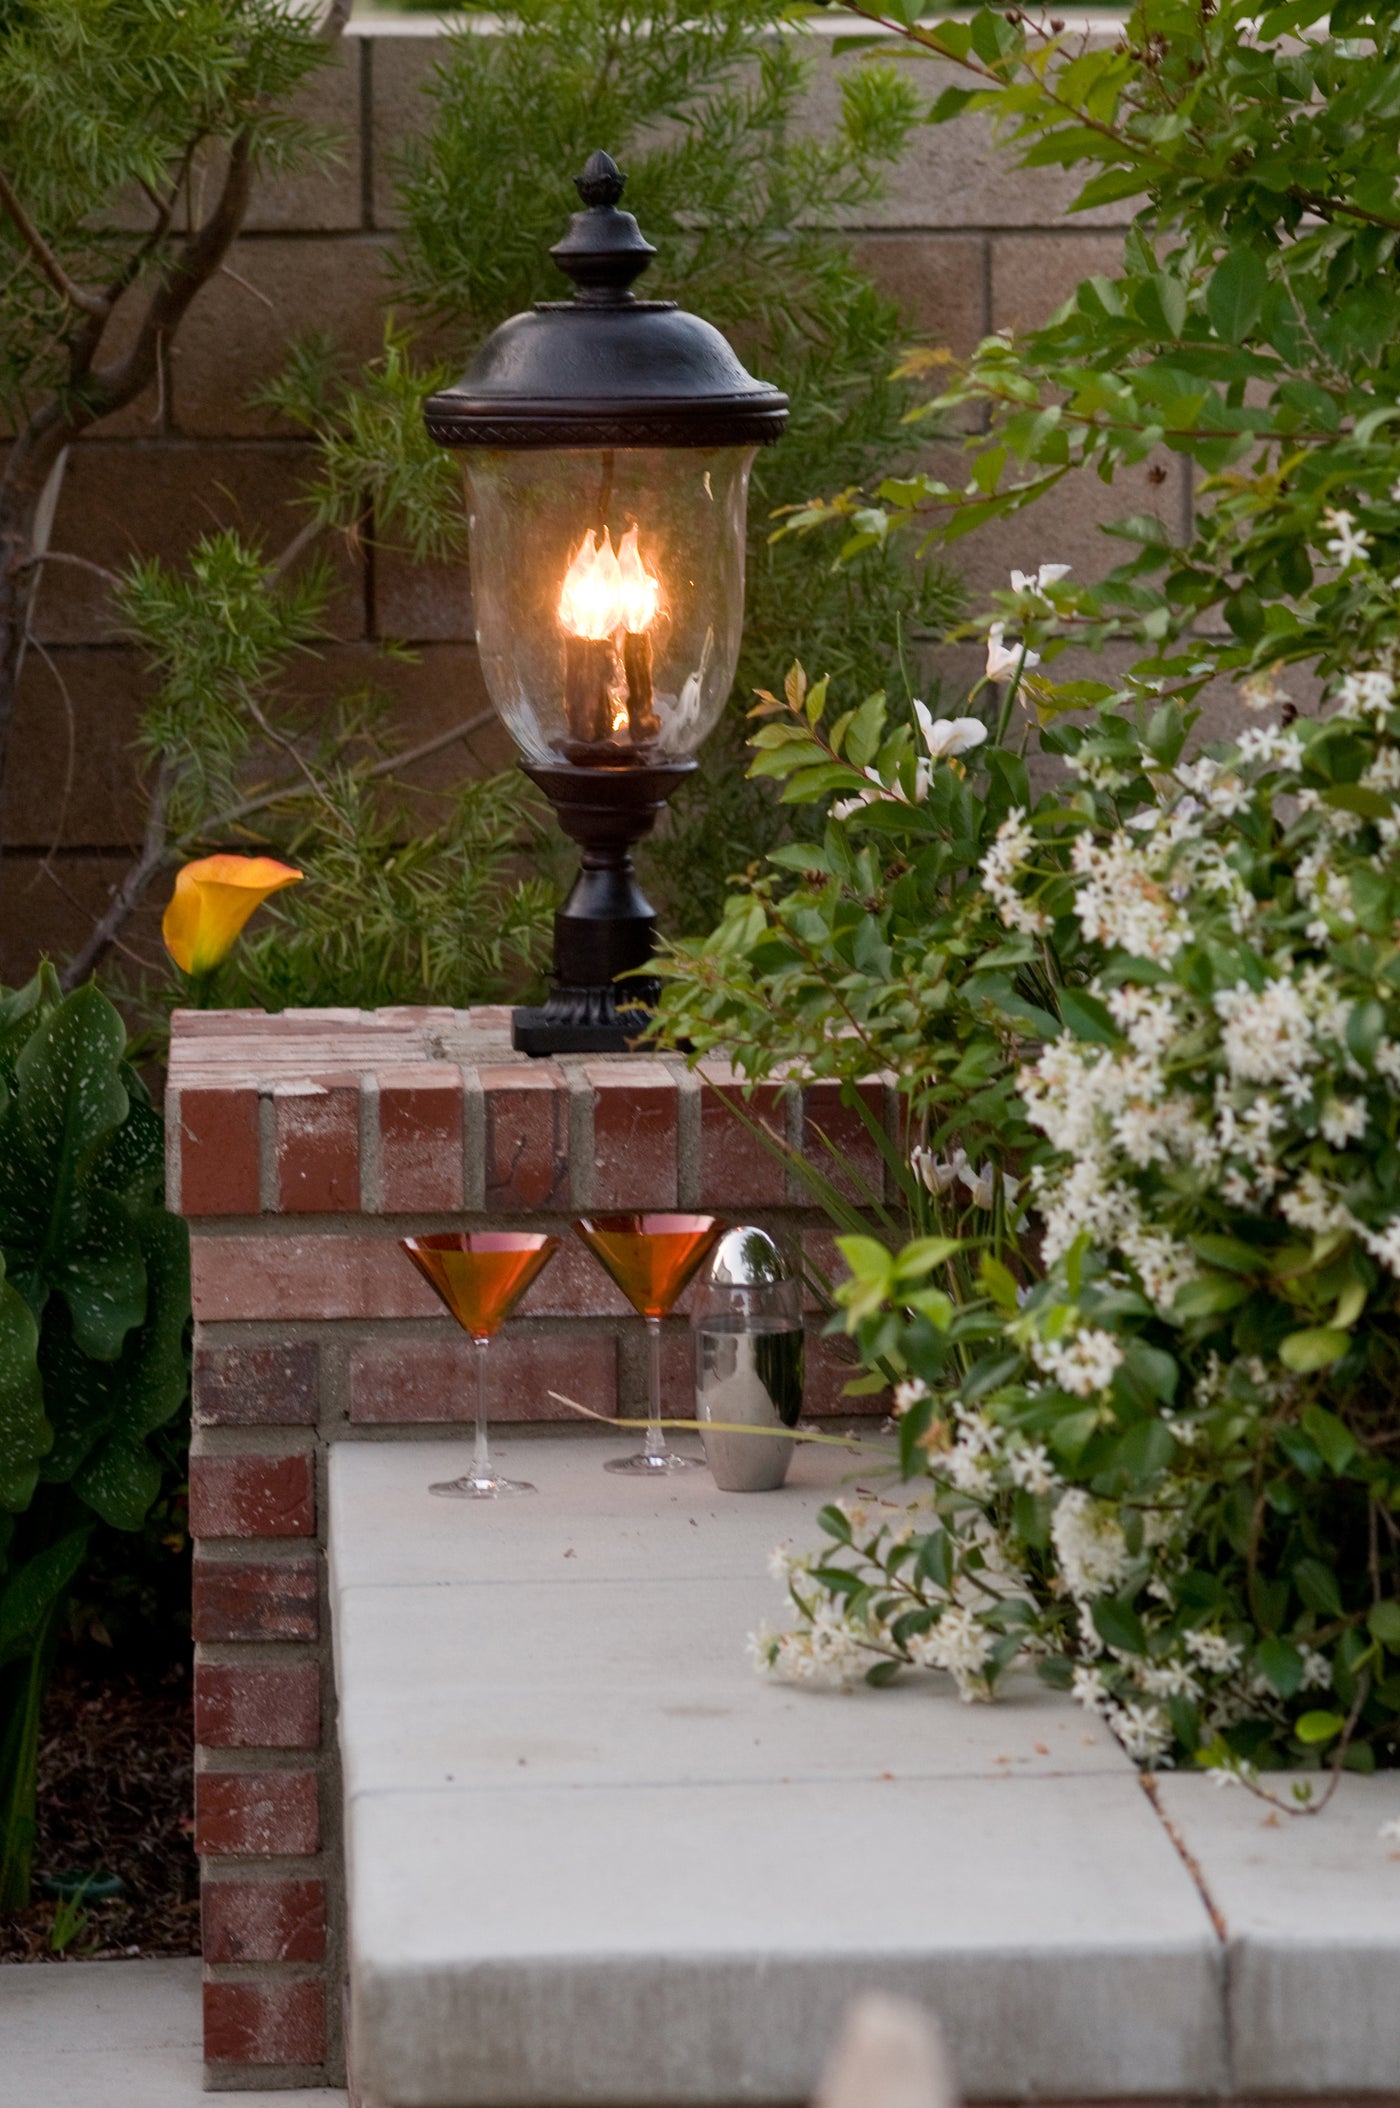 Carriage House DC 3-LT Outdoor Pole/Post Lantern